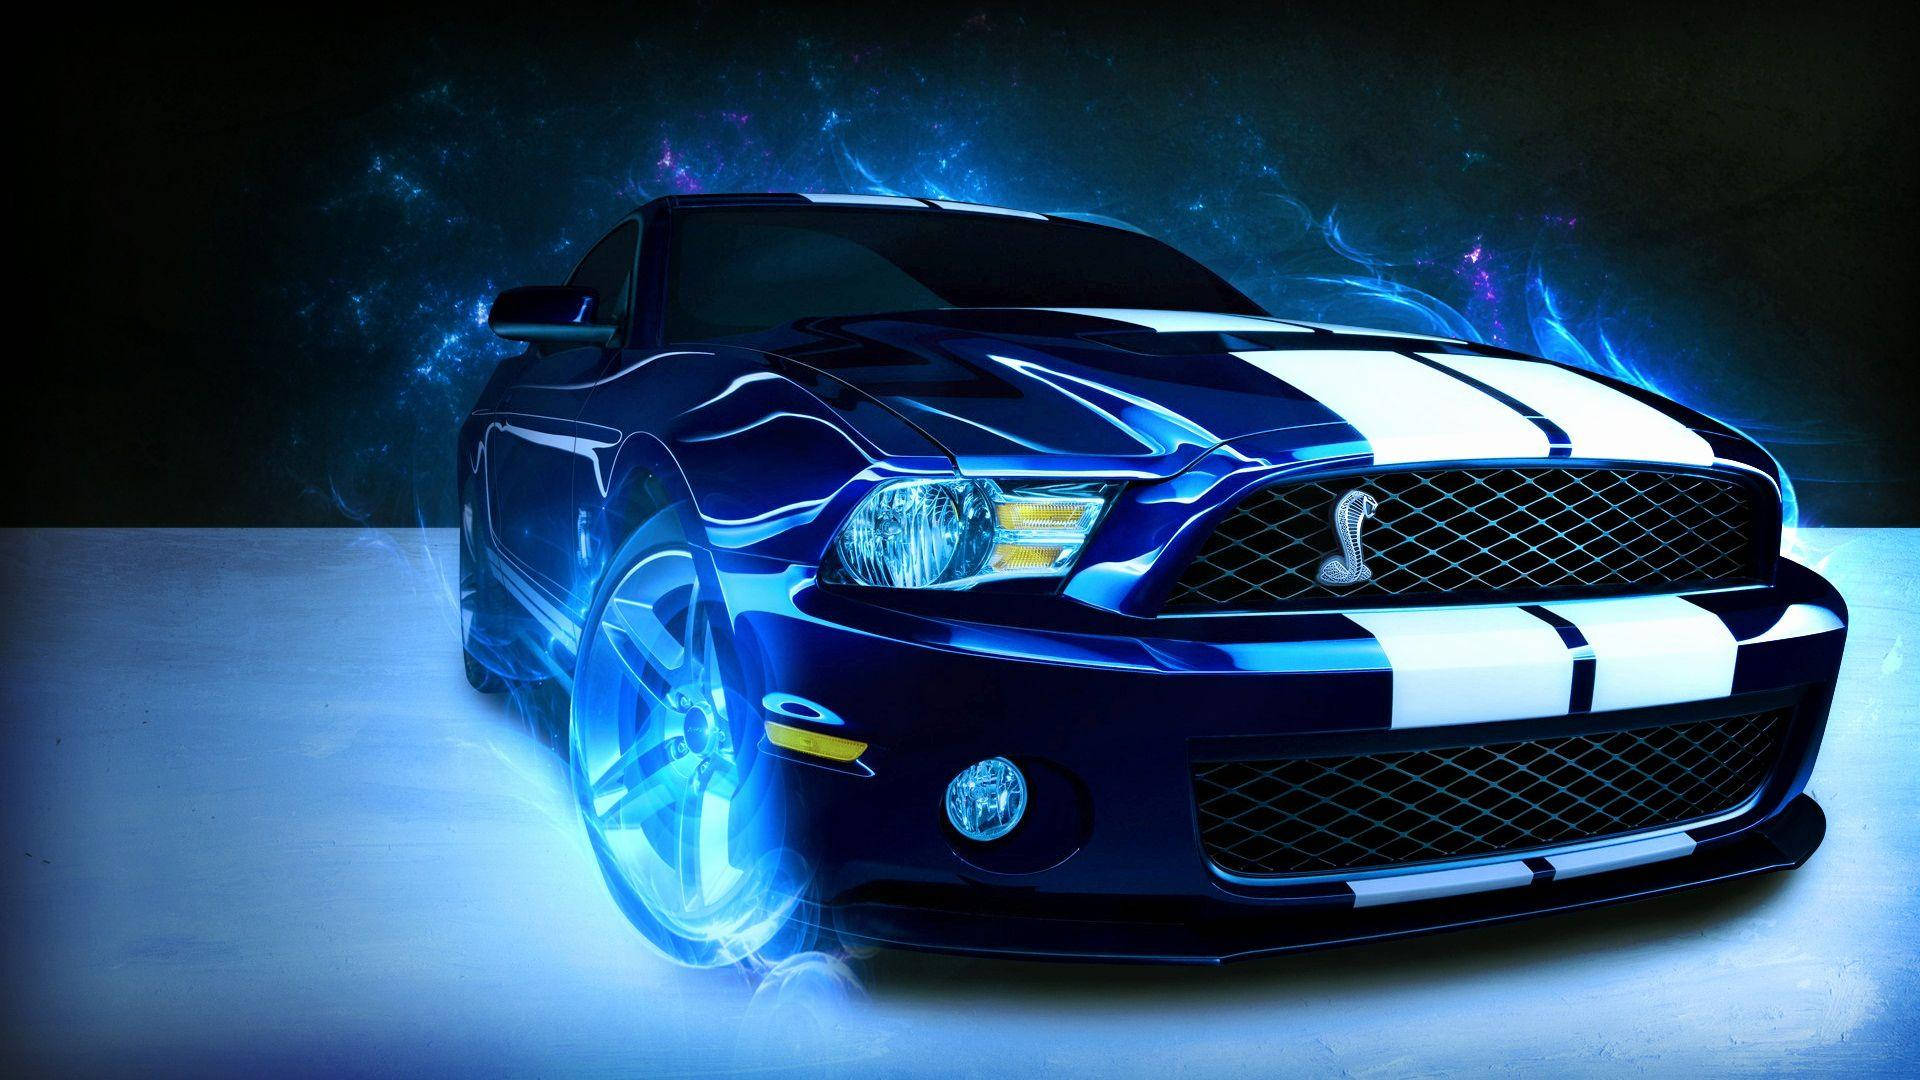 Blue Fire Car With Stripes Background